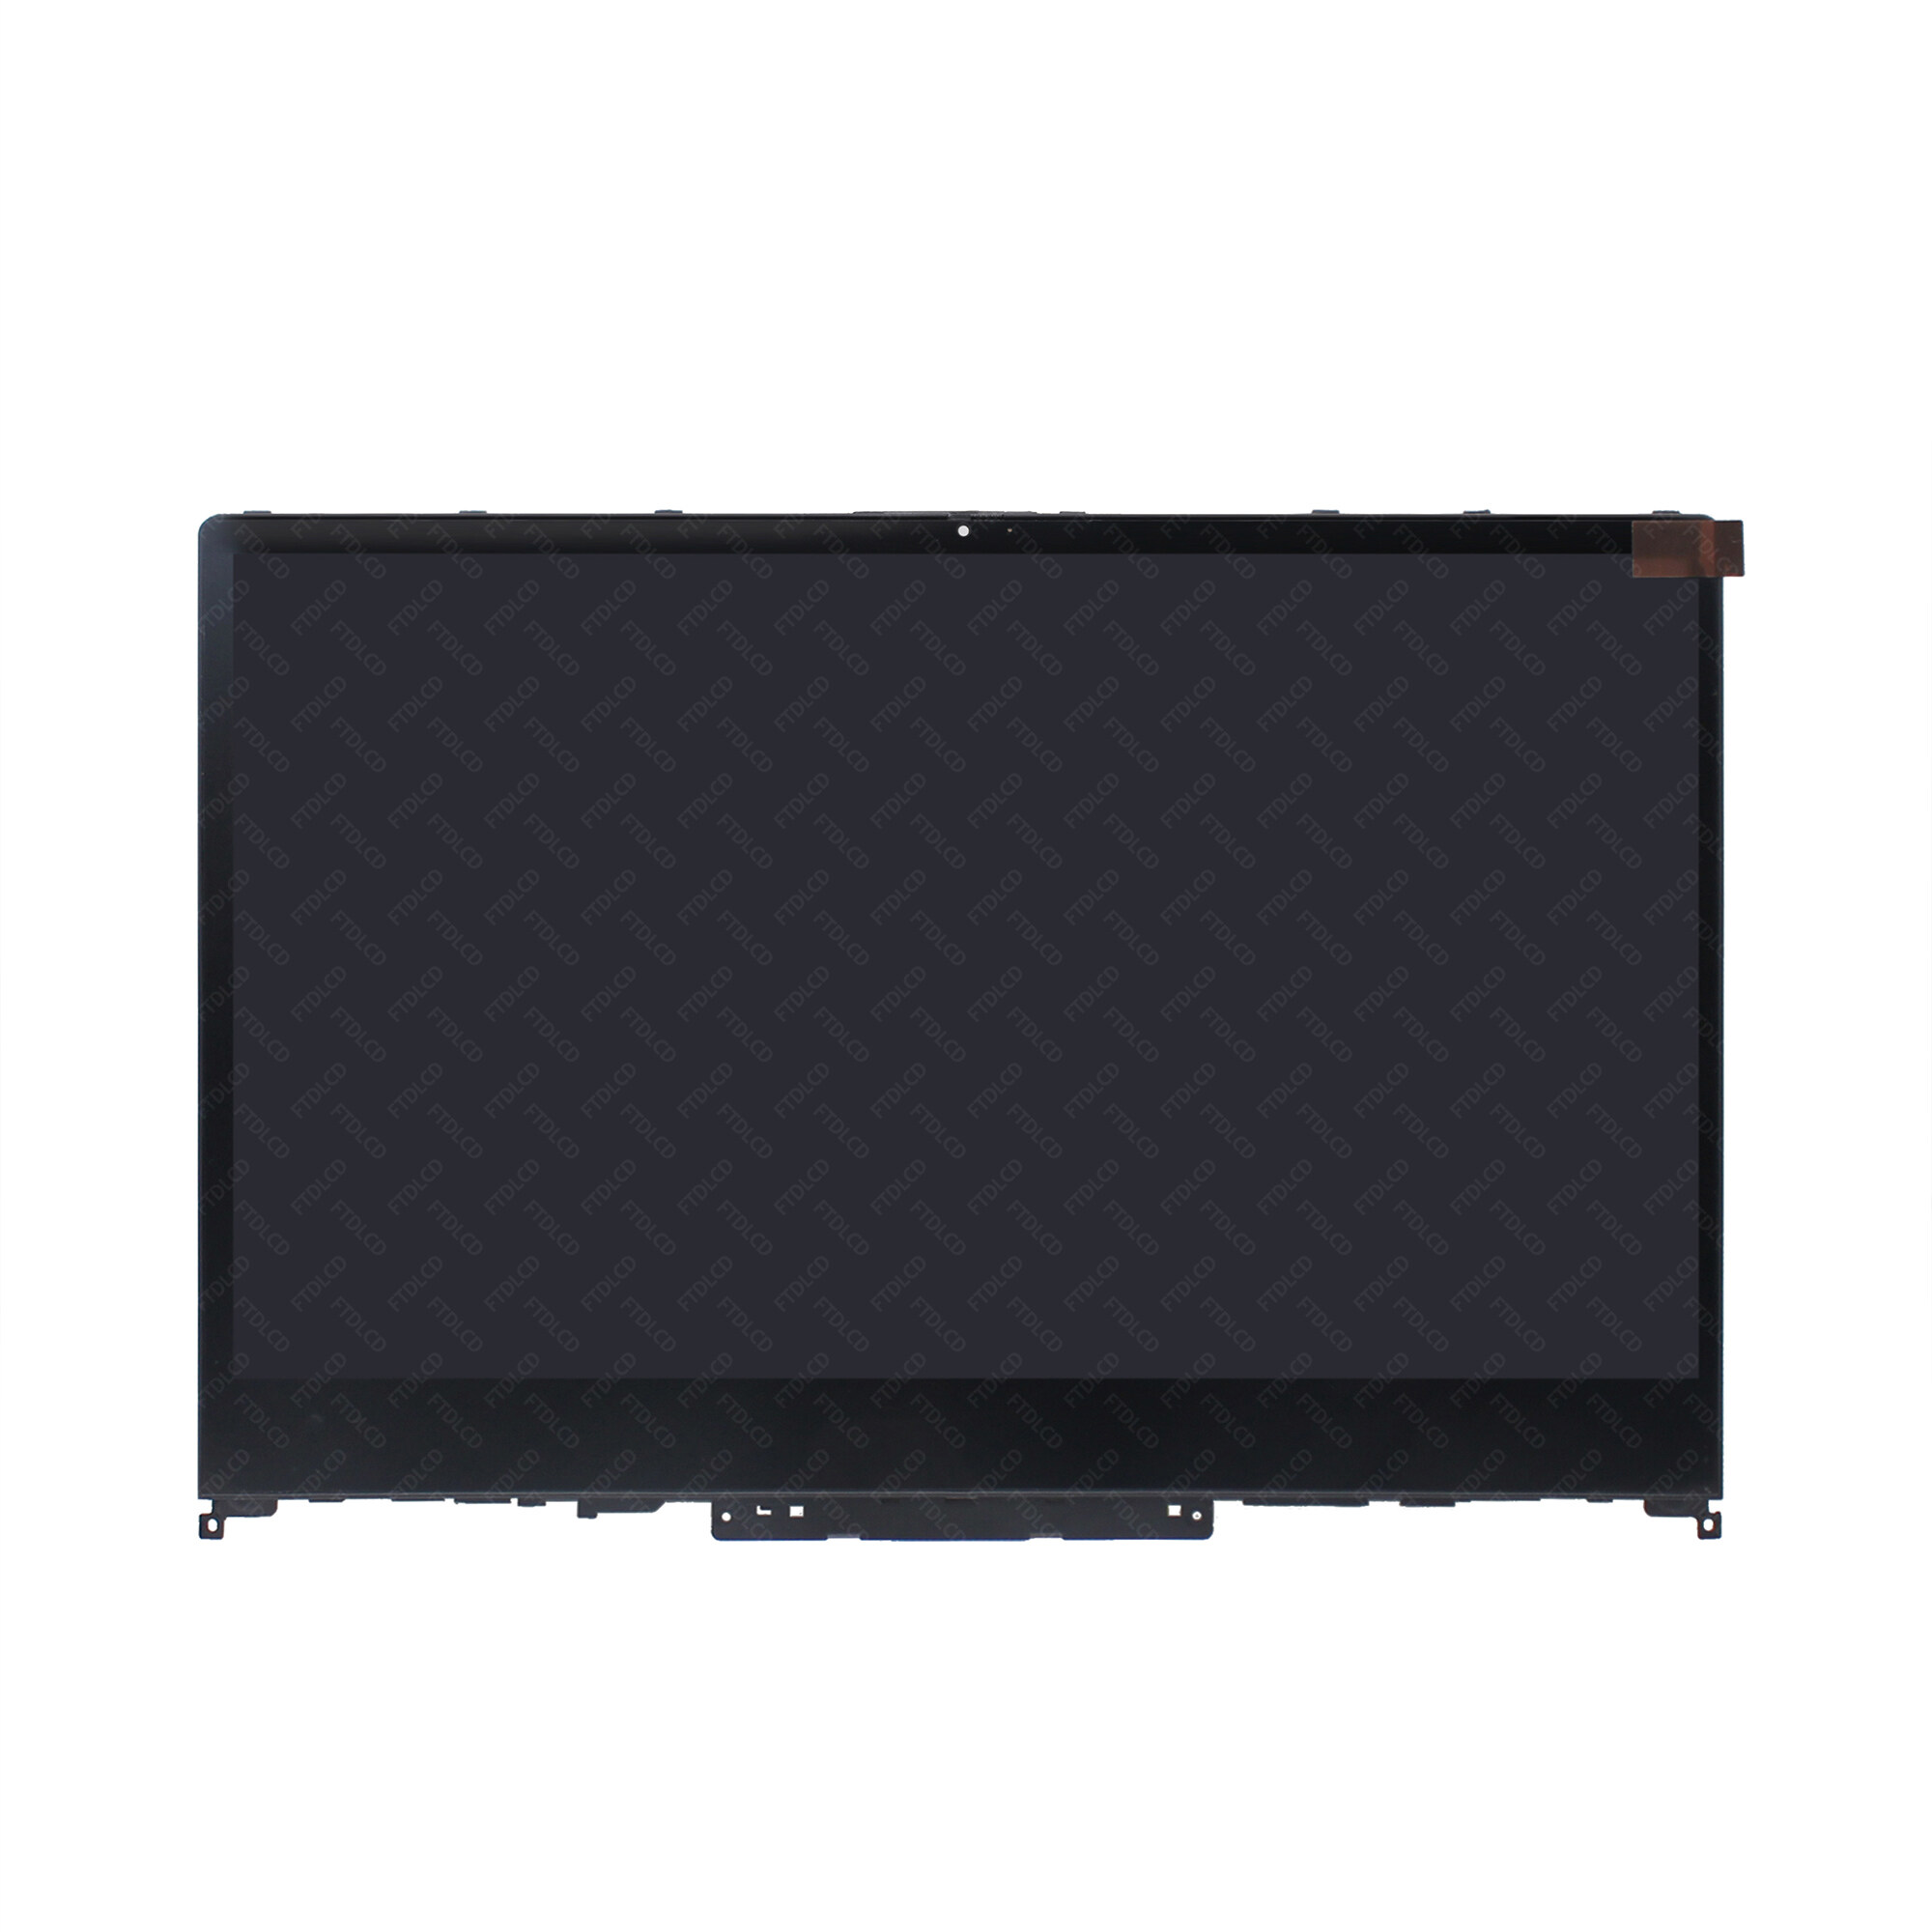 Kreplacement 5D10S39566 15.6-inch HD LCD touch screen digitizer assembly for Lenovo Ideapad C340-15IIL C340-15IWL -15 FHD 30PIN LCD